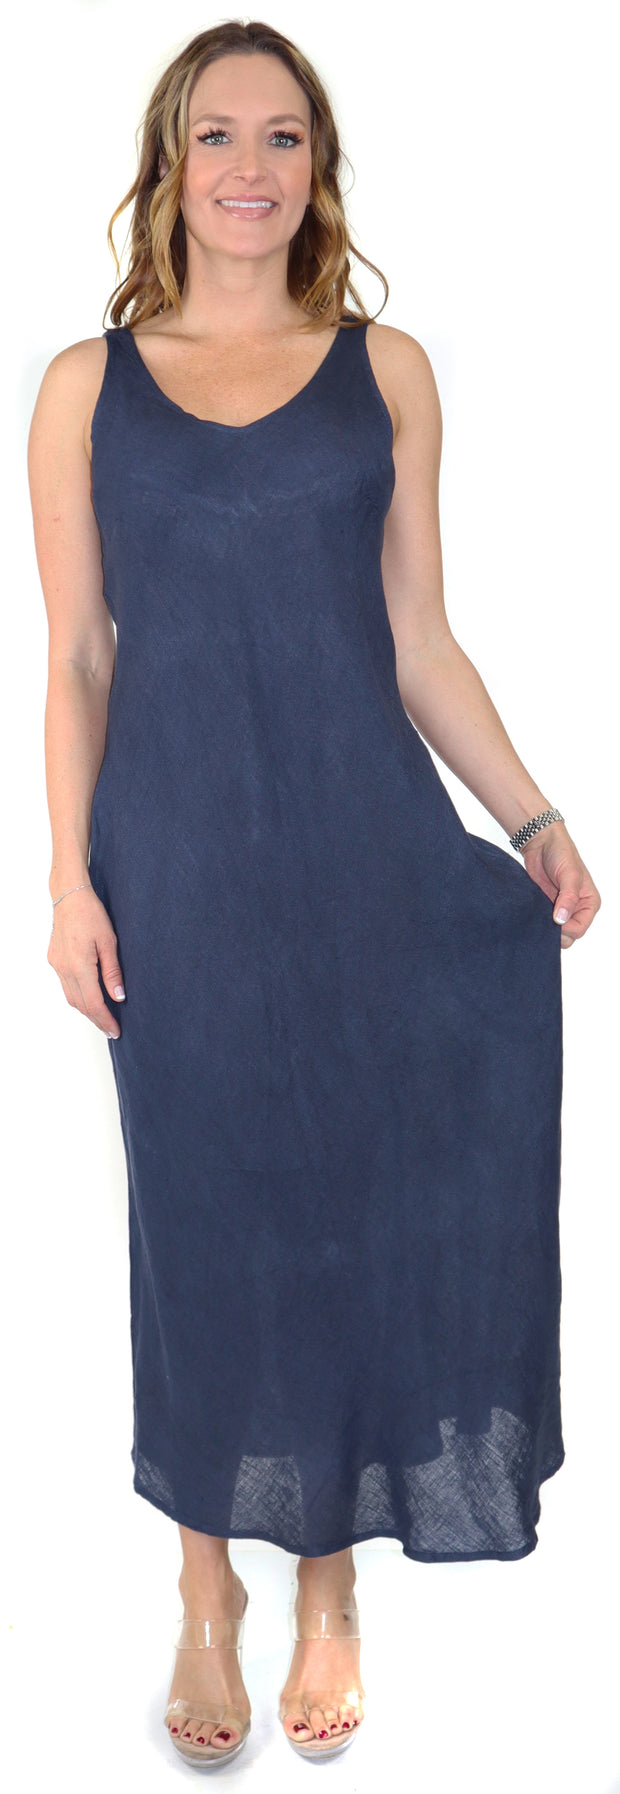 Women's Biased Long Maxi Dress, Perfect Fit Every Time, Made in Italy, 100% linen